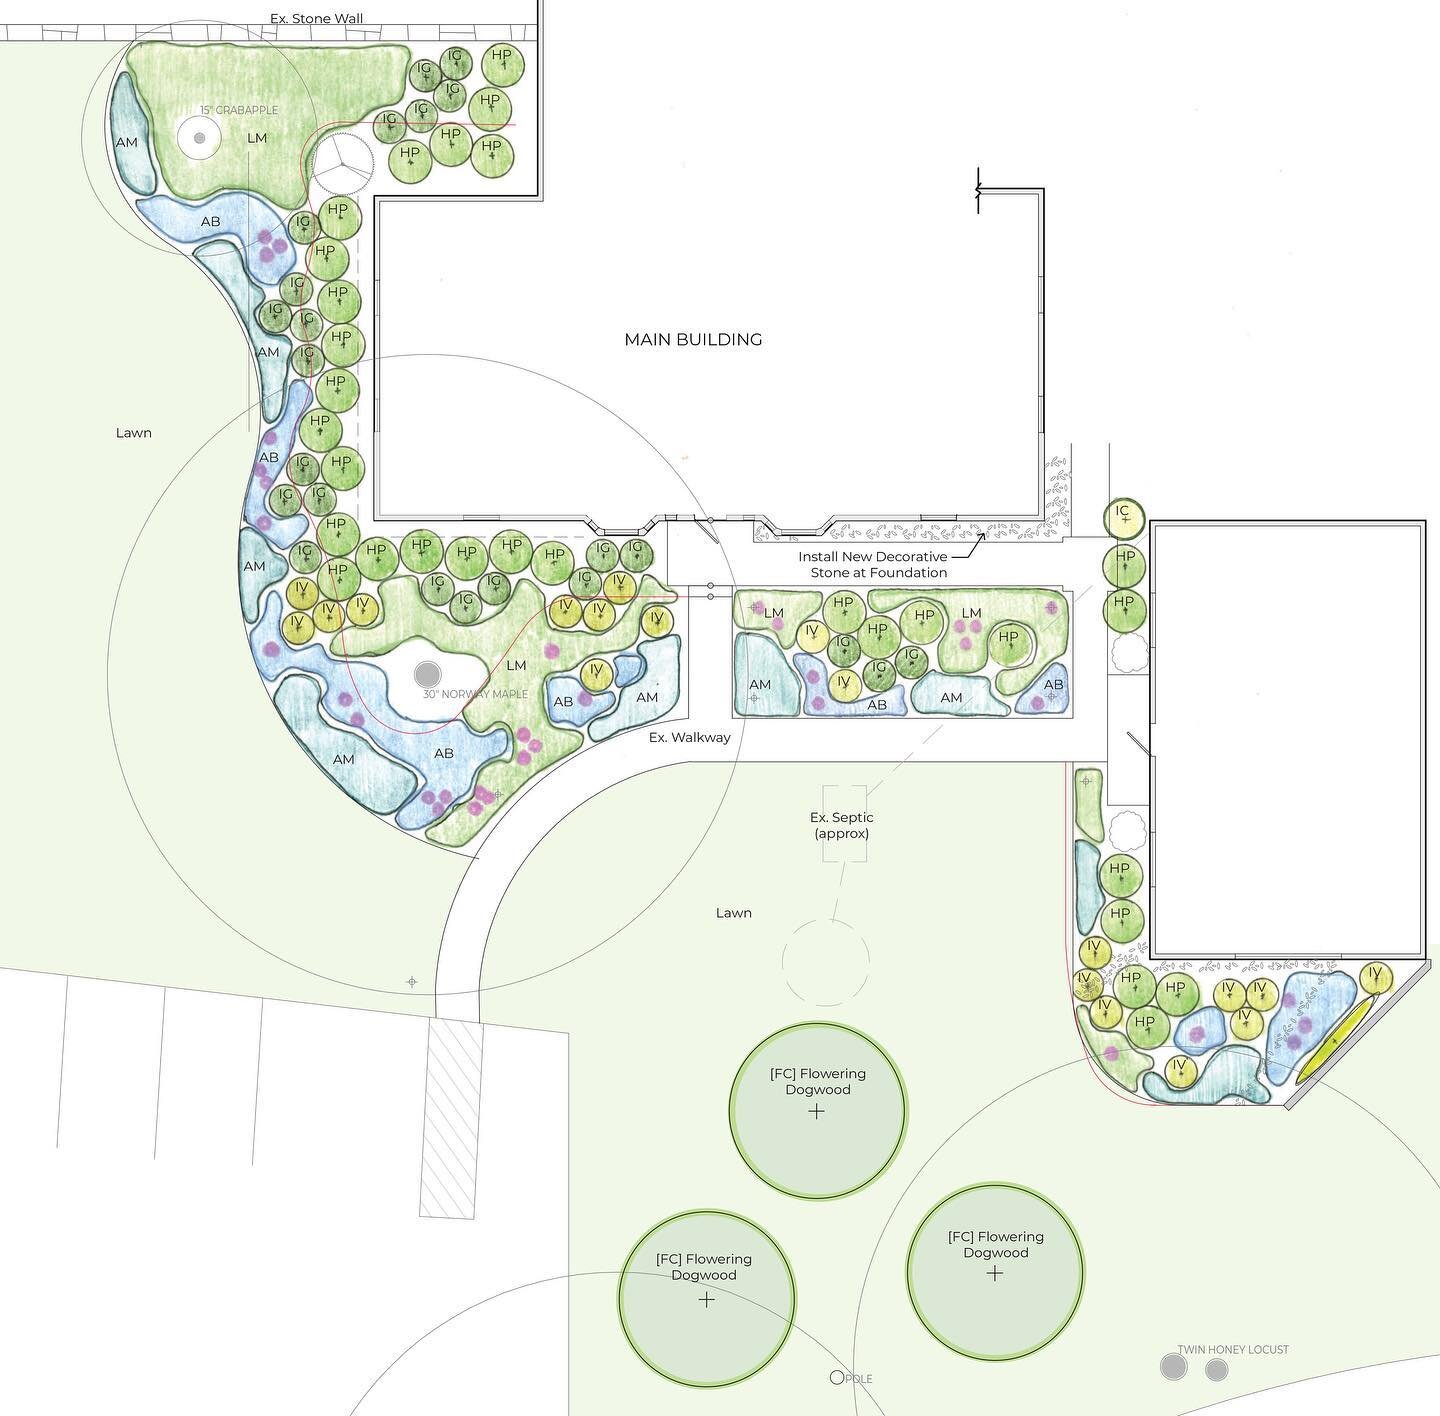 Schematic Planting Design for a local publishing company 

four season interest ✔️

healthy balance of native &amp; ornamental plants ✔️

eye catching curb appeal ✔️